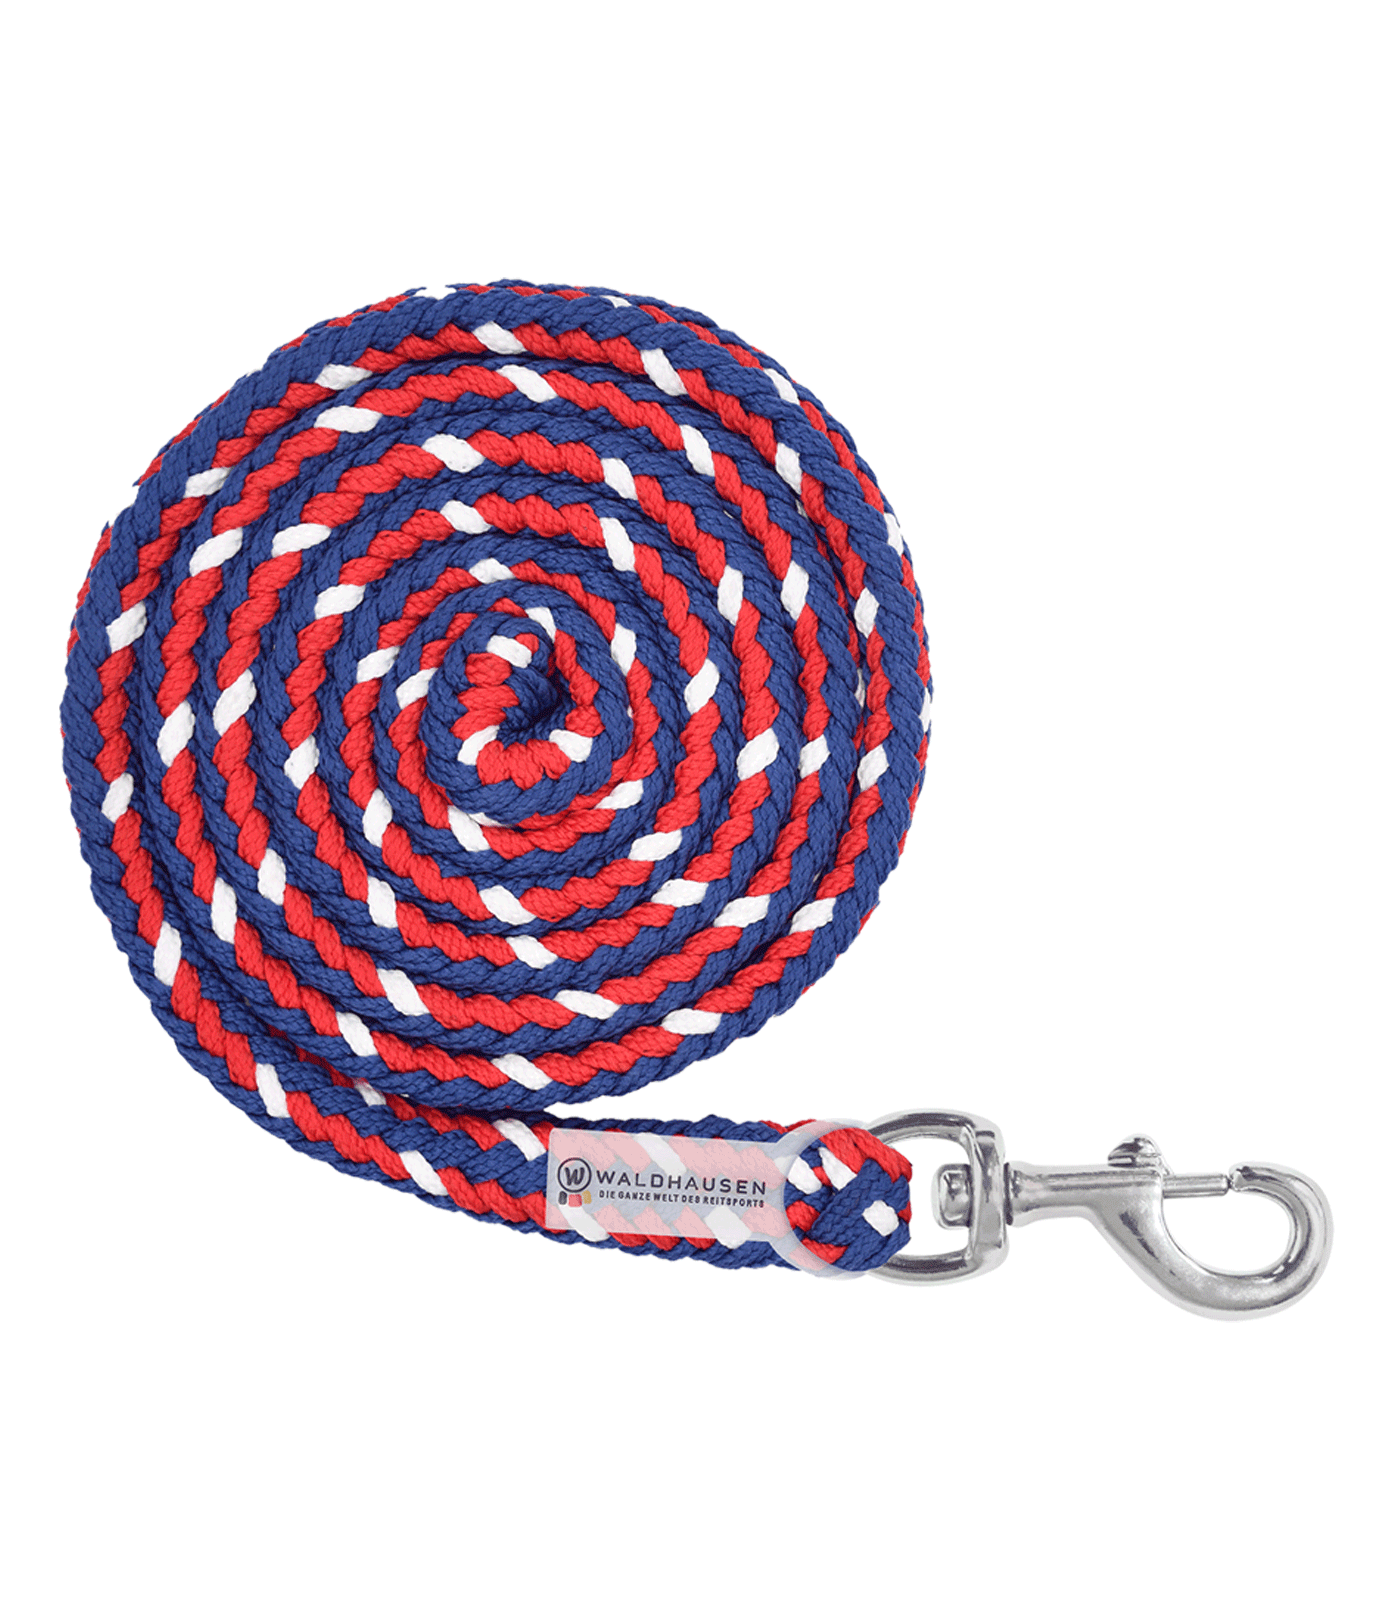 Plus Lead Rope - snap hook red/blue/white